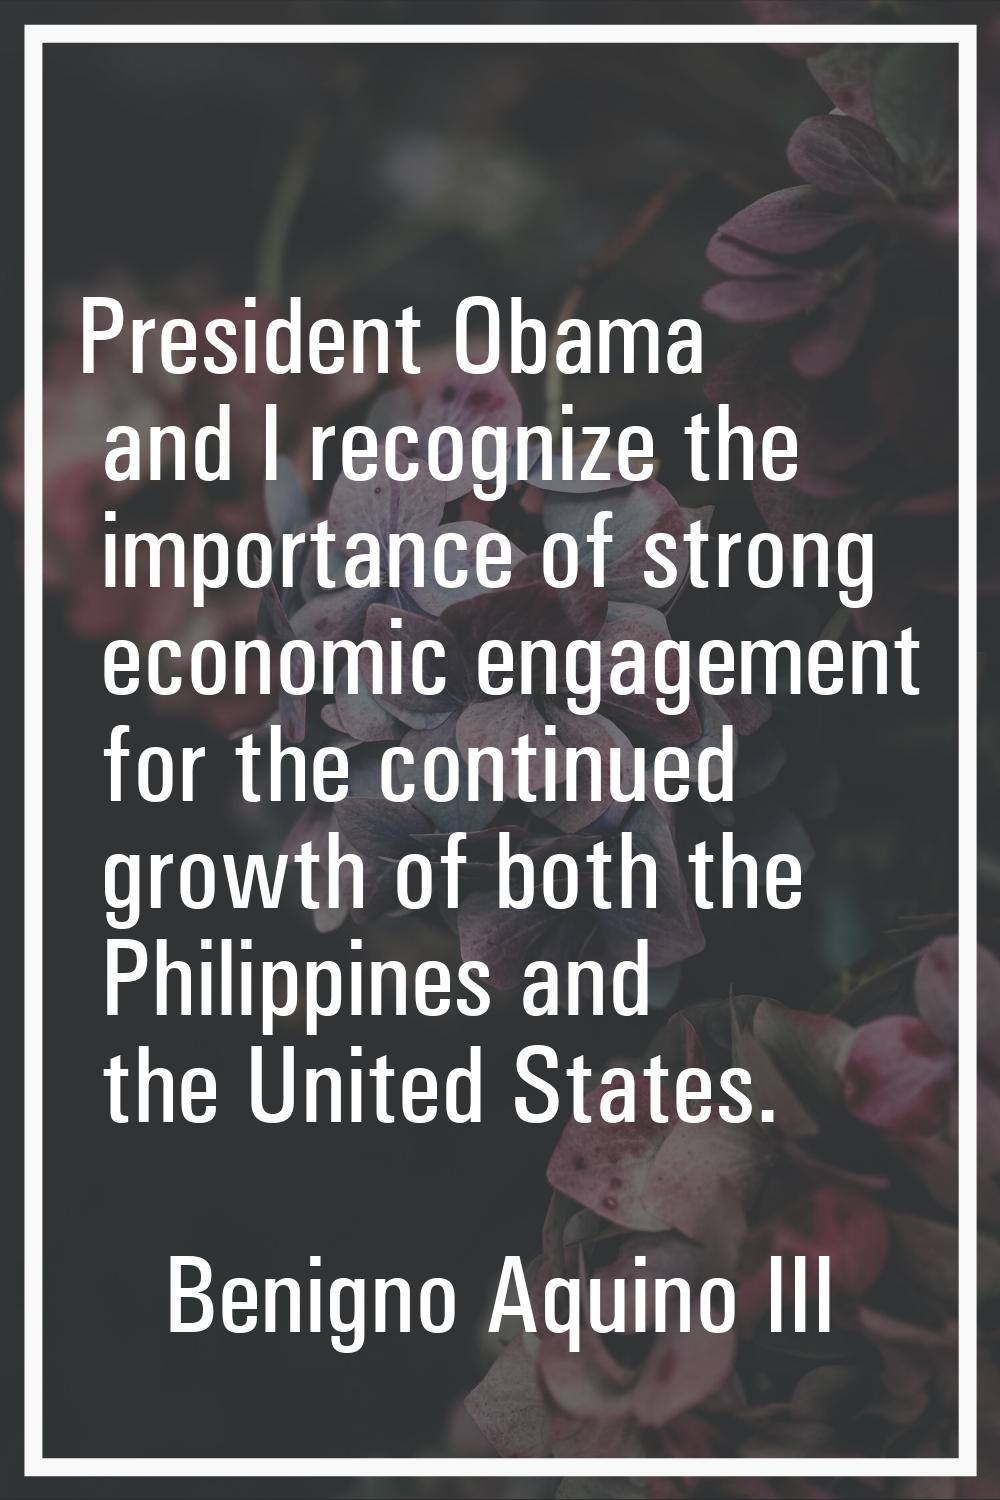 President Obama and I recognize the importance of strong economic engagement for the continued grow